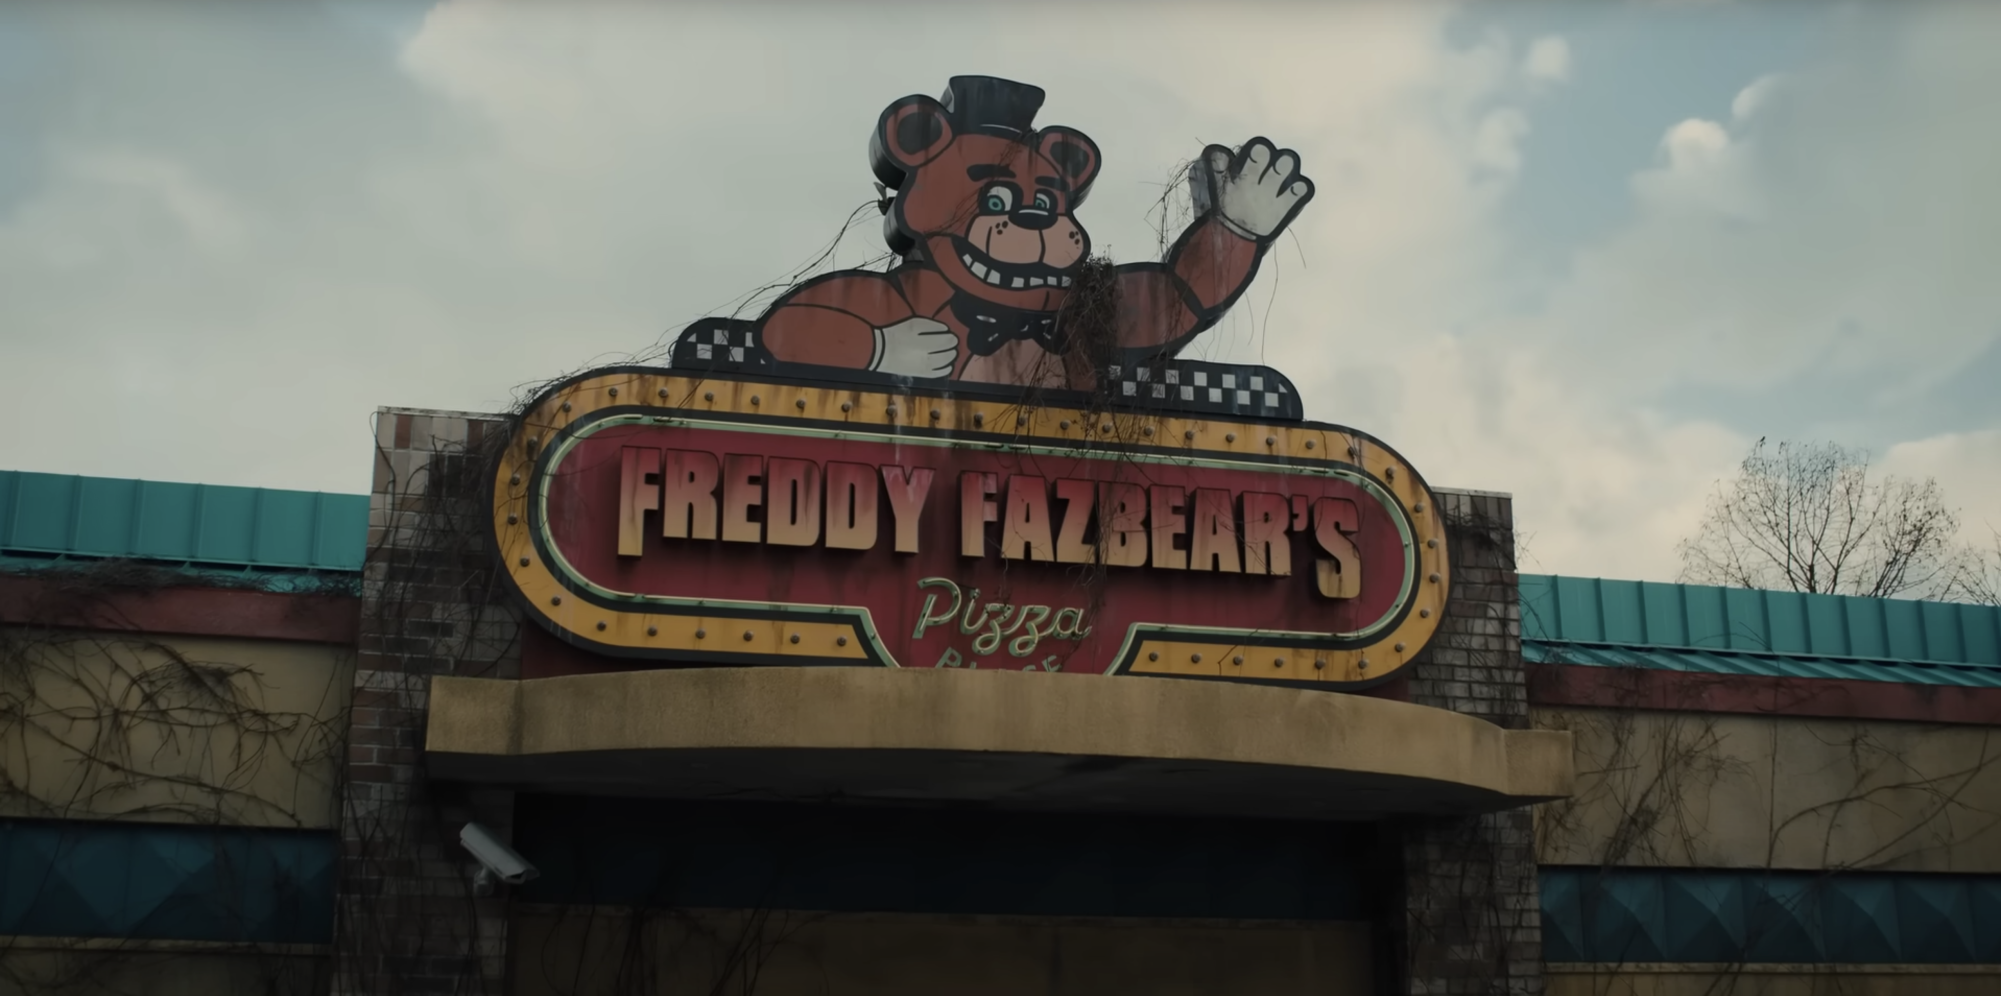 How to Watch Five Nights at Freddy's – Where to Stream Online in 2023 - IGN